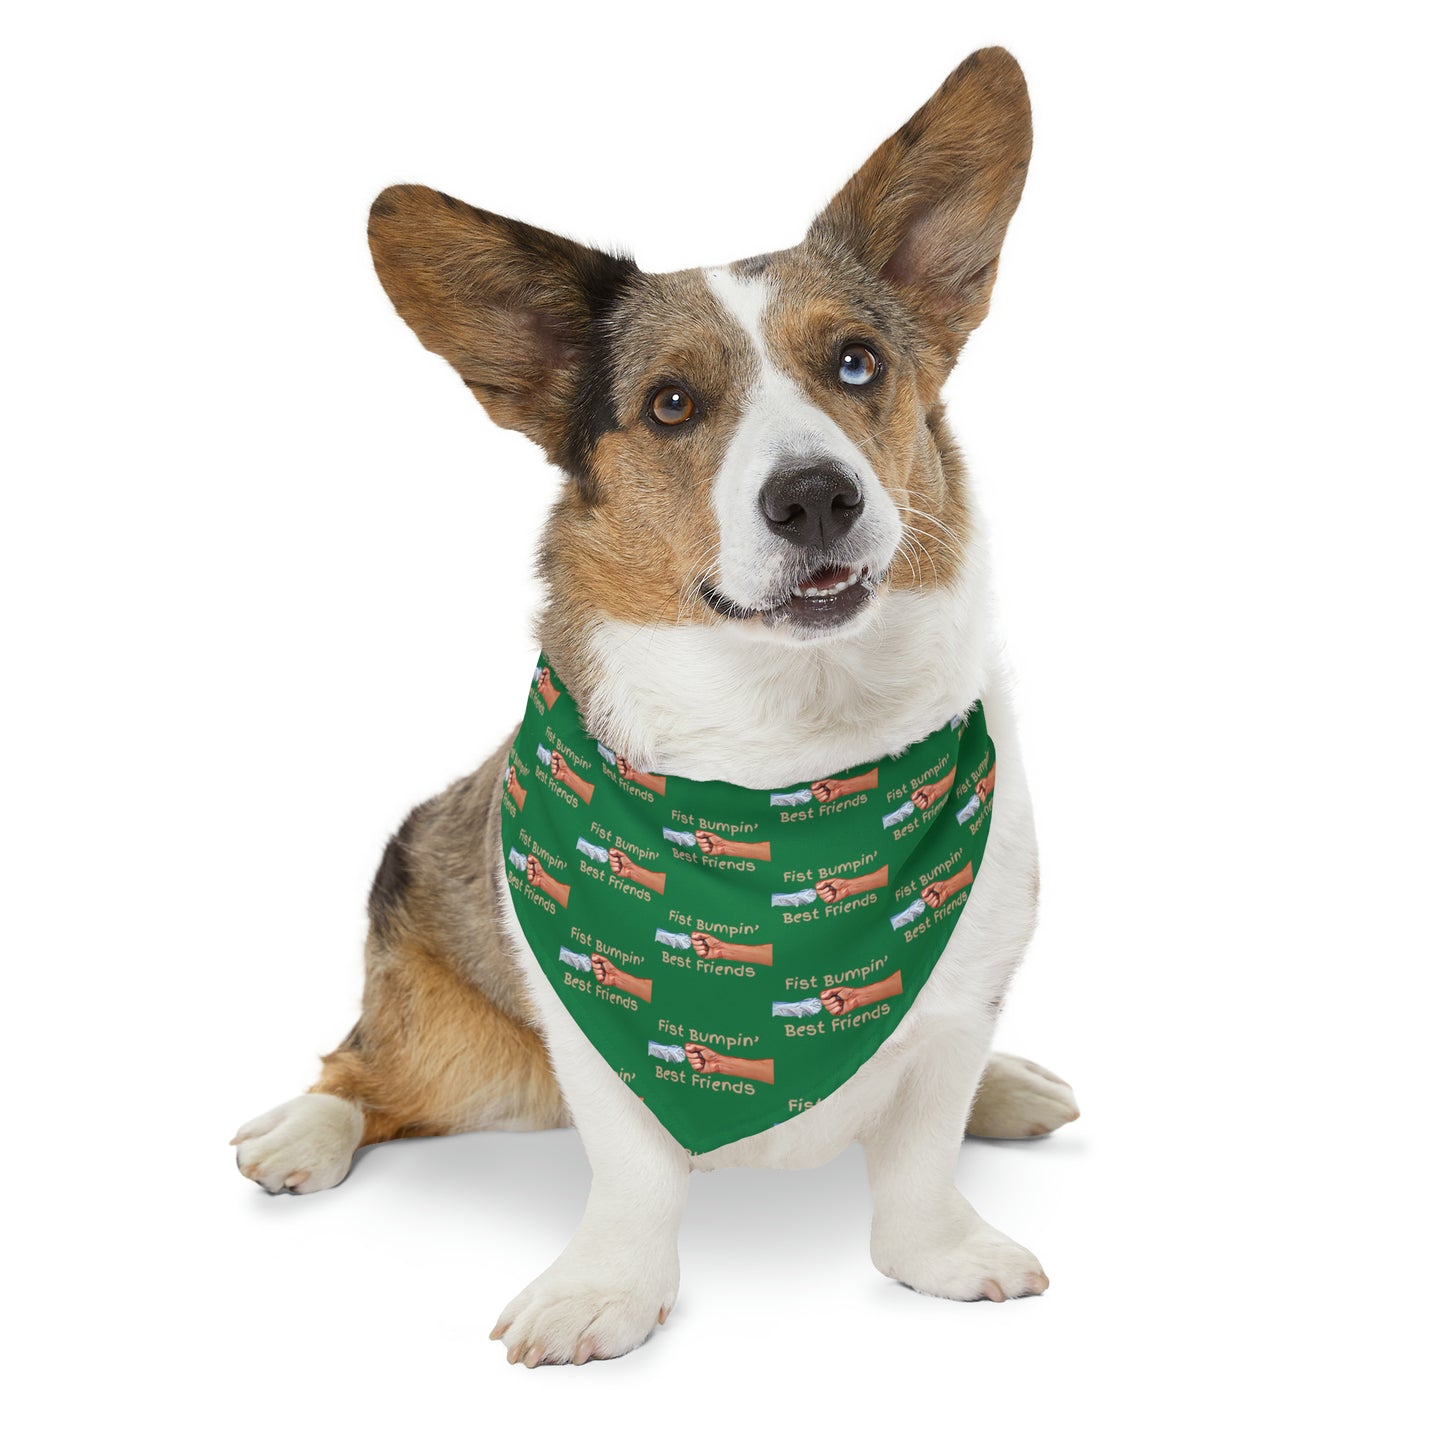 Fist Bumpin’ Best Friends Opie’s Cavalier King Charles Spaniel Pet Bandana Collar Green with Tan lettering.